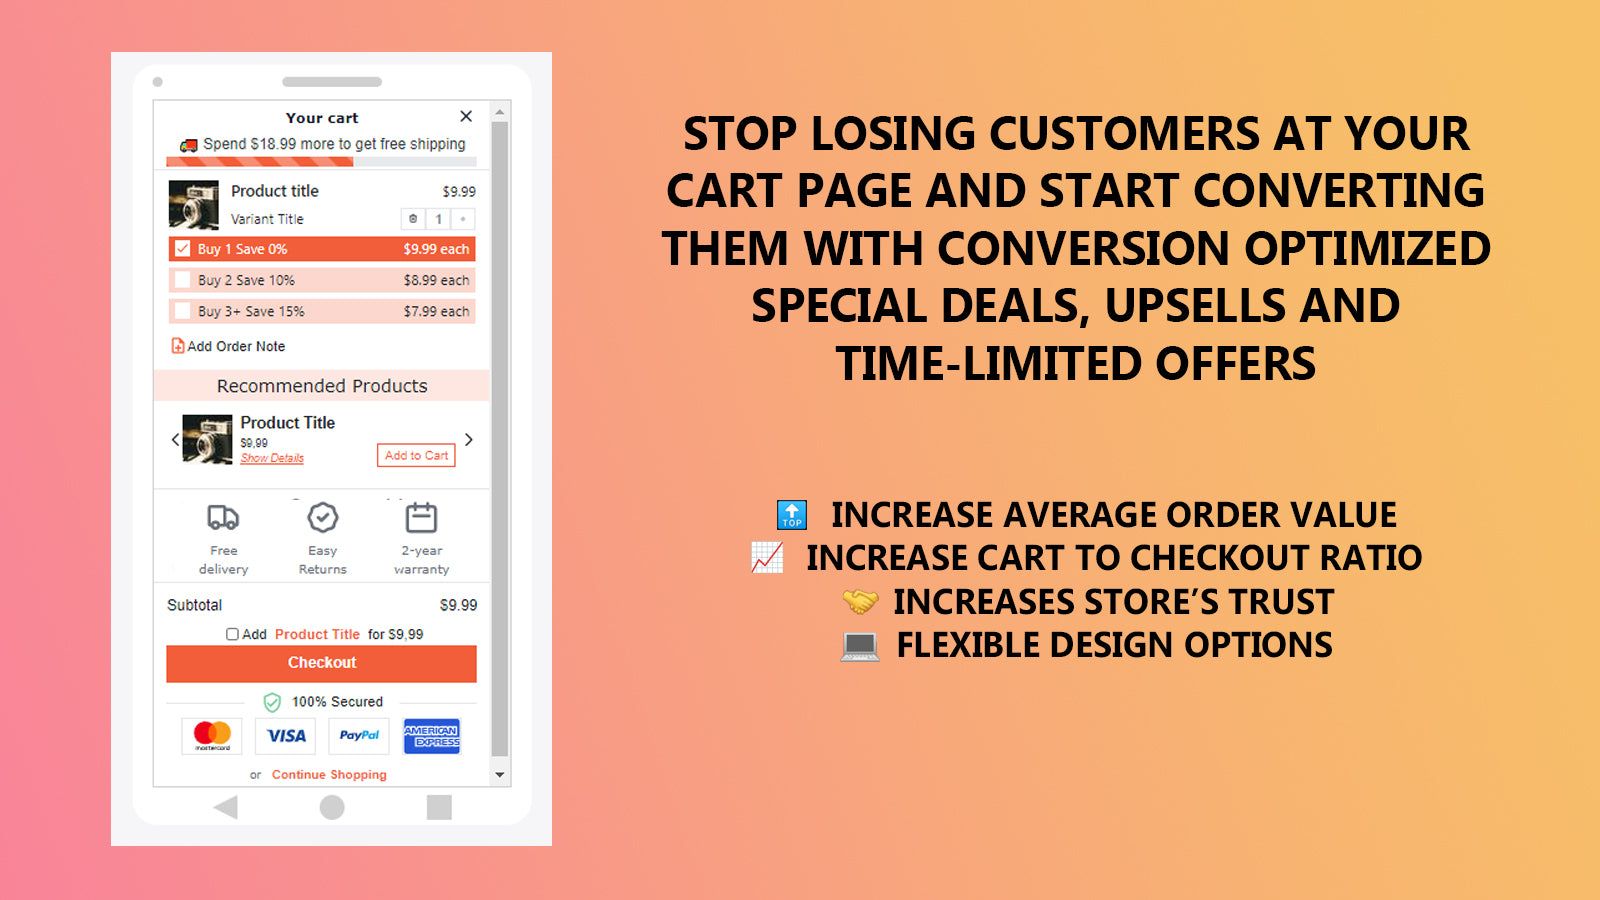 Stop losing customers at your cart page